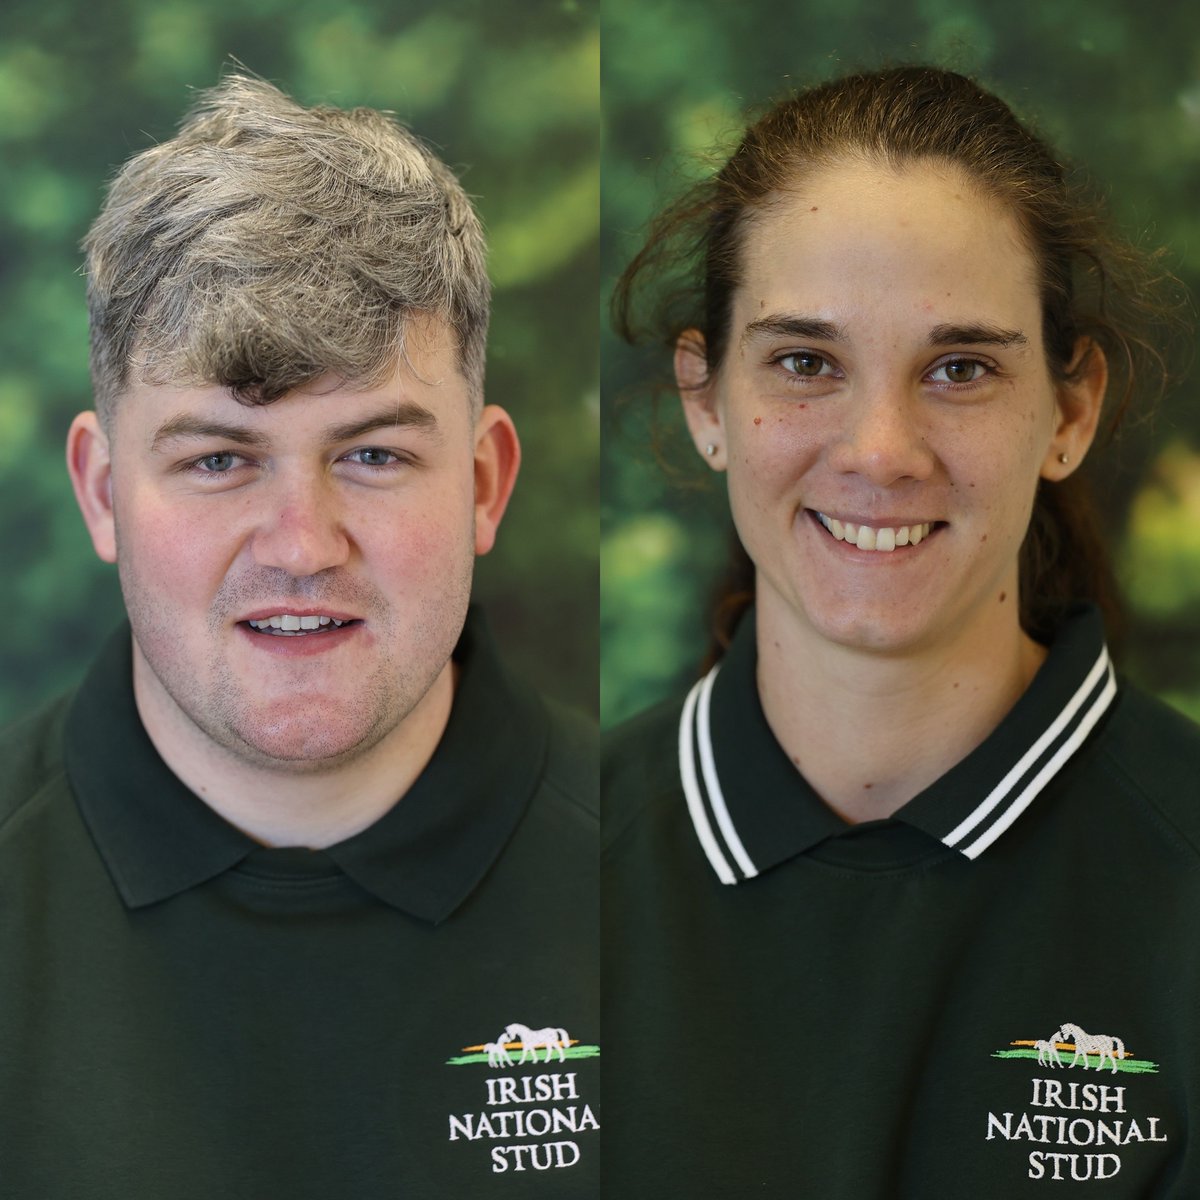 Student Blog from Brooke Ward🇦🇺 and Ian Hyland🇮🇪 'We’re officially just over halfway through the course. With 2 months and 1 week left till graduation. Time certainly does fly by when you’re having fun, learning and creating lifetime memories.' ⬇️⬇️⬇️ irishnationalstud.ie/student-blog-f…